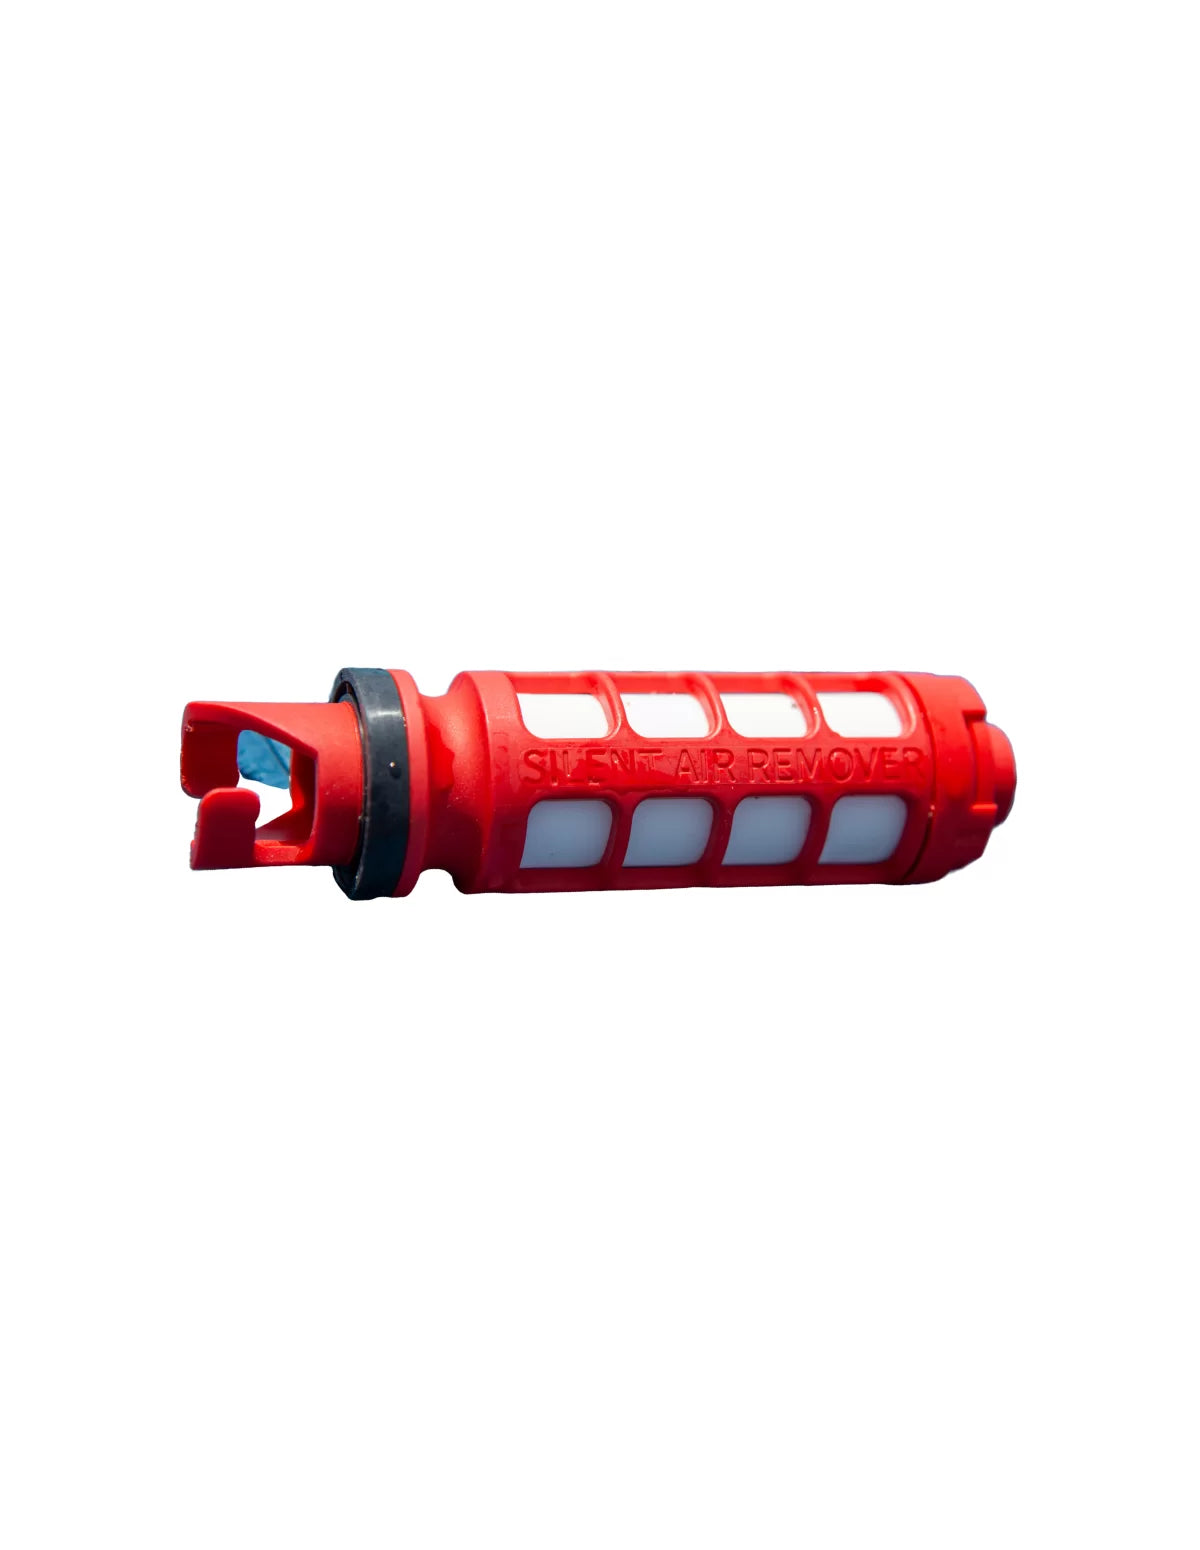 Red Paddle Co Silent Air Remover